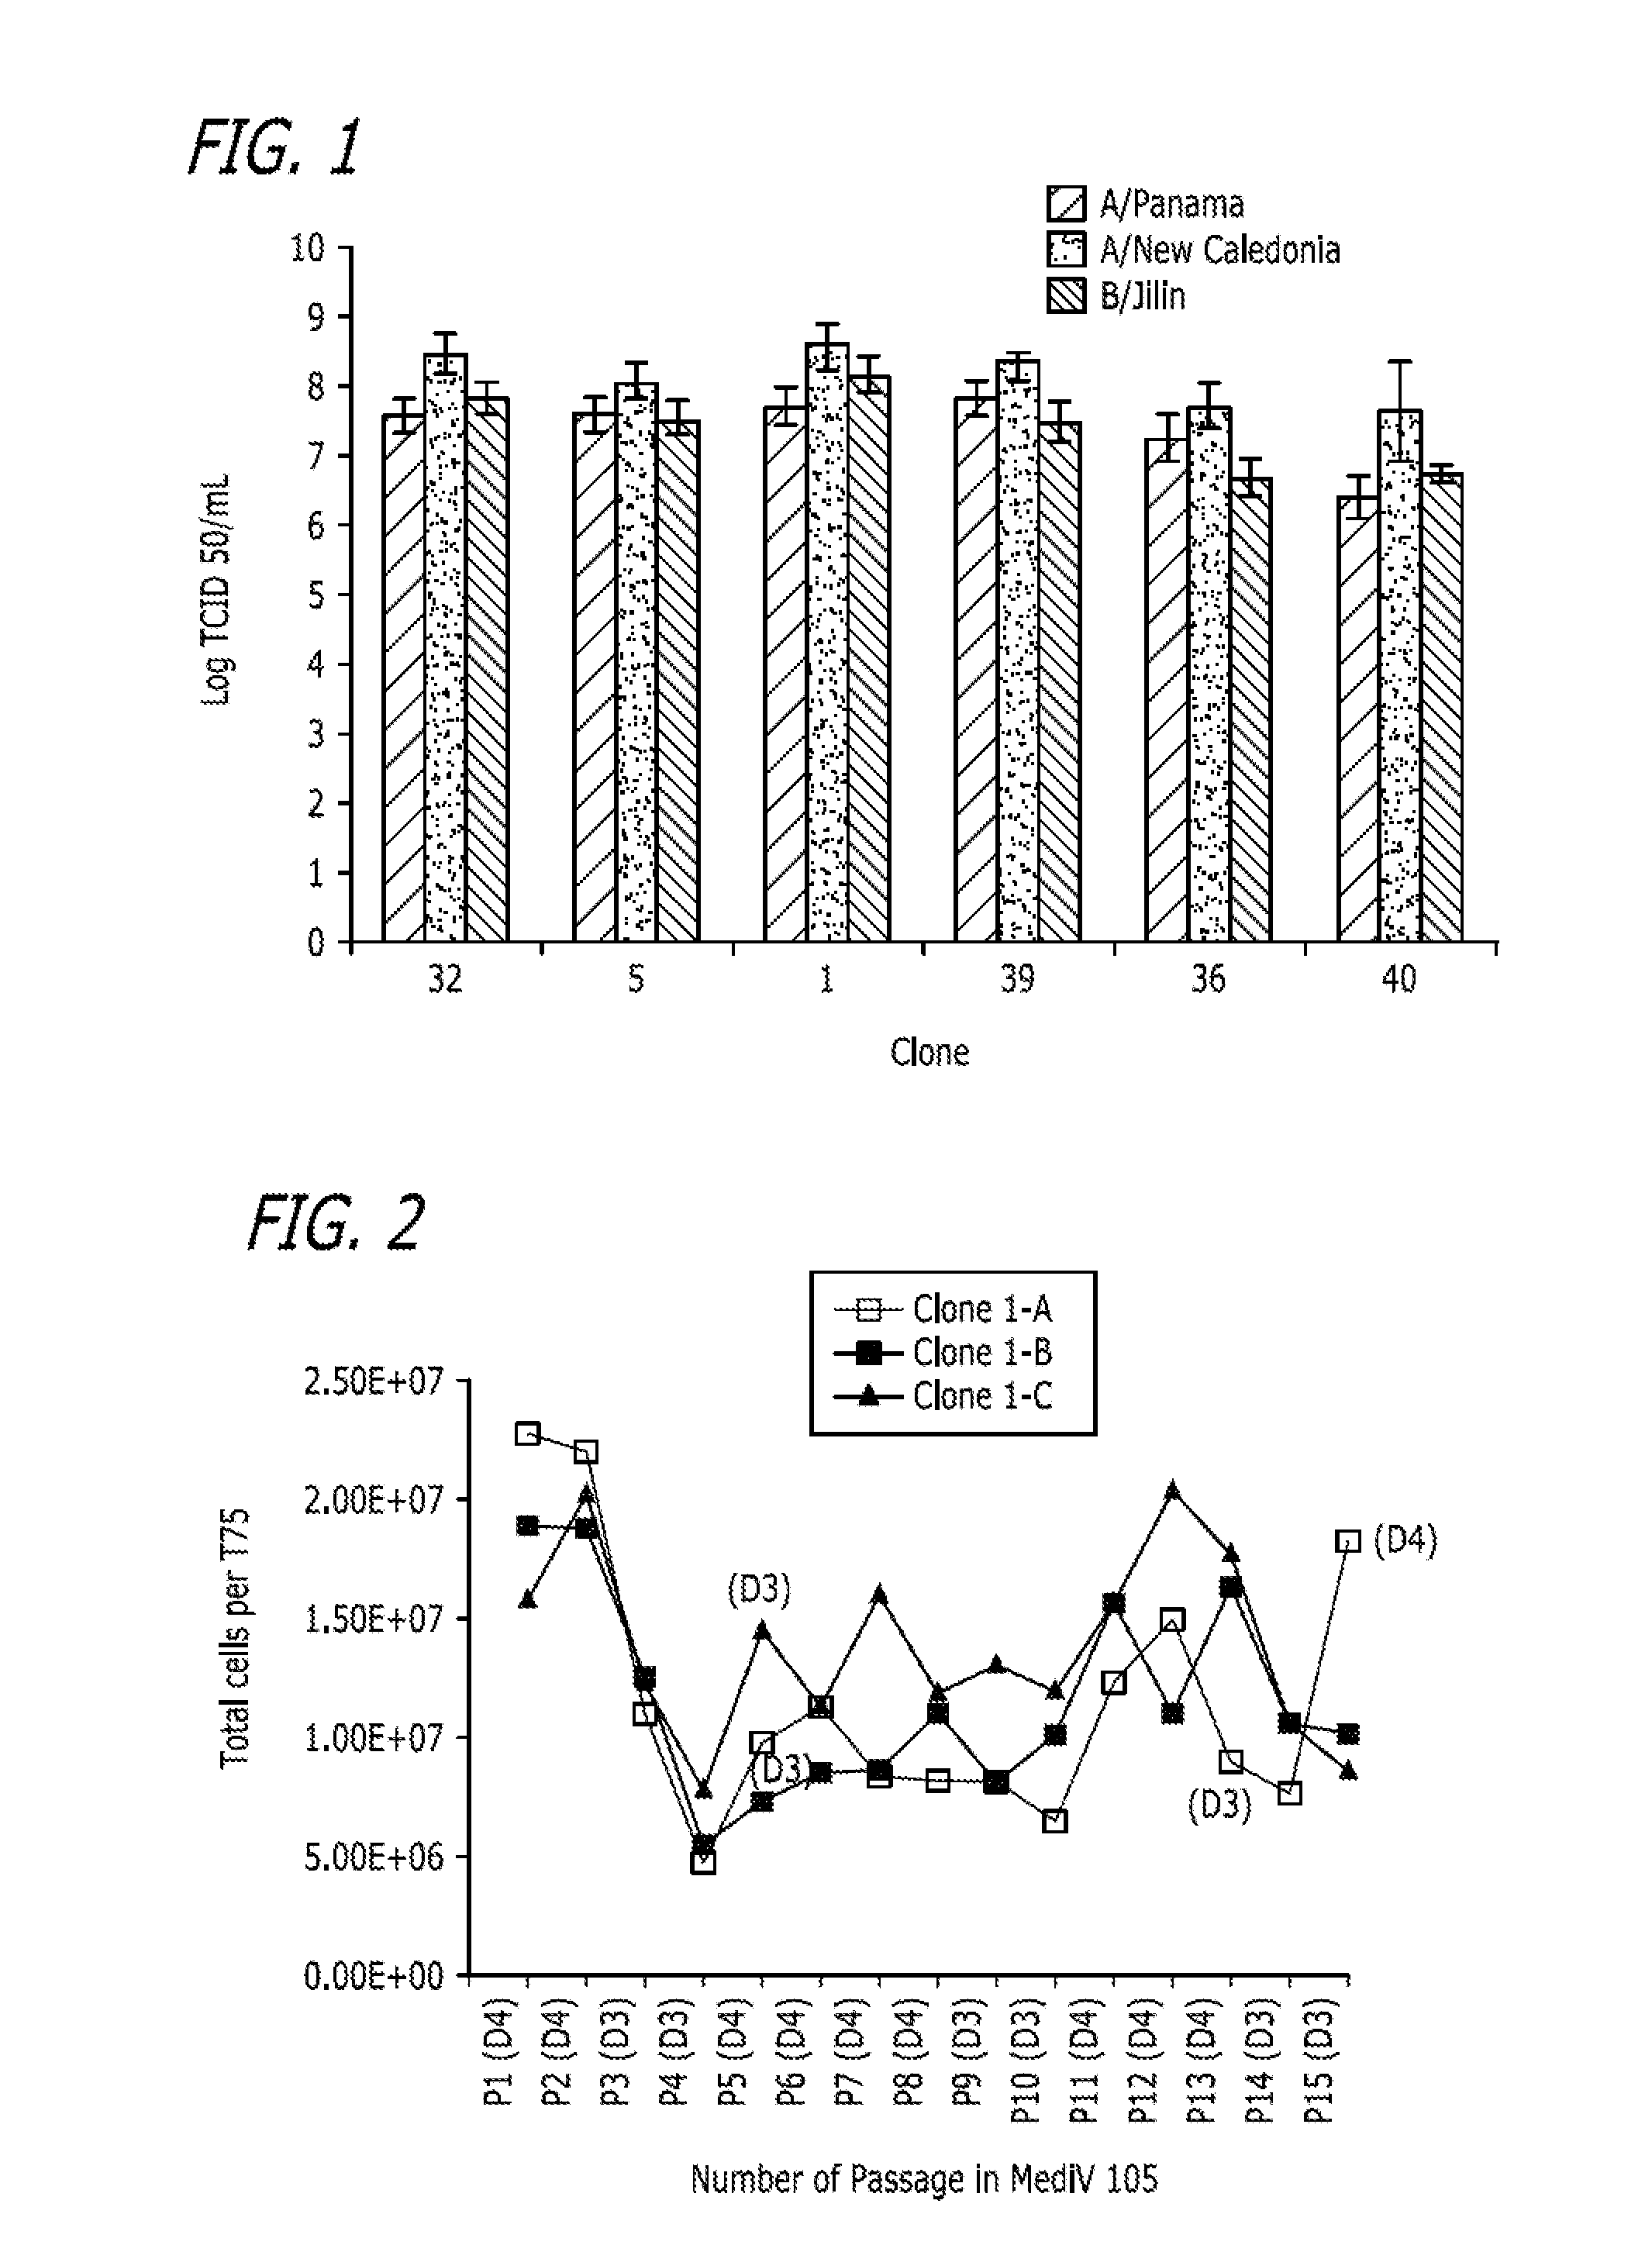 Method of purifying influenza virus and removing MDCK cell DNA contaminants